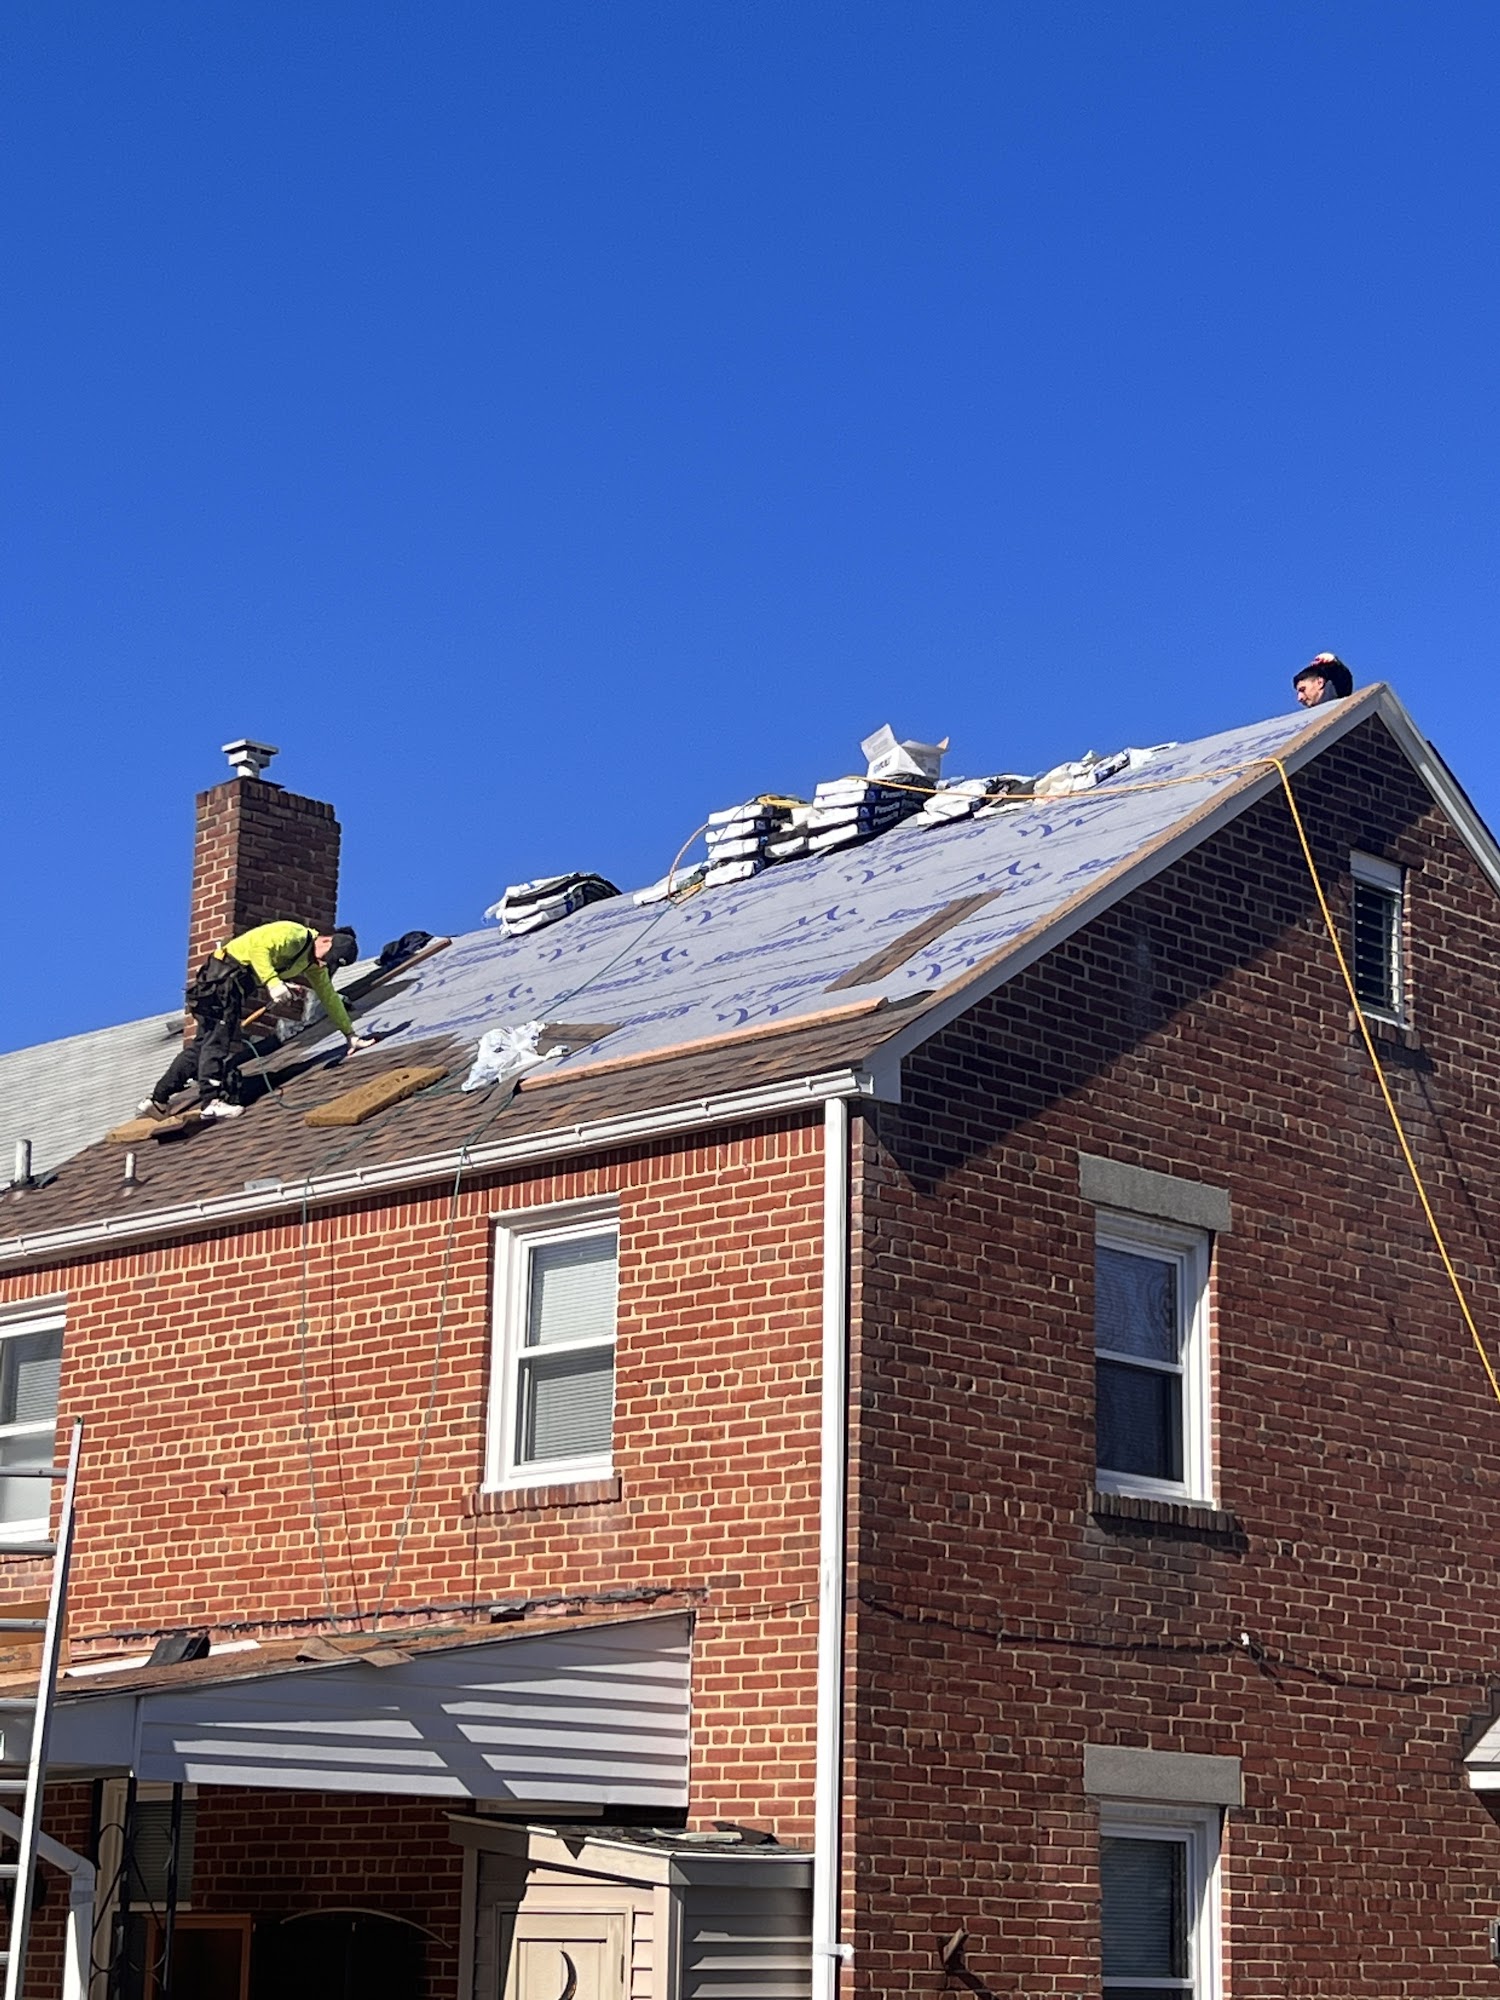 Lehigh Valley Roofers 6811 Spring Creek Rd, Macungie Pennsylvania 18062